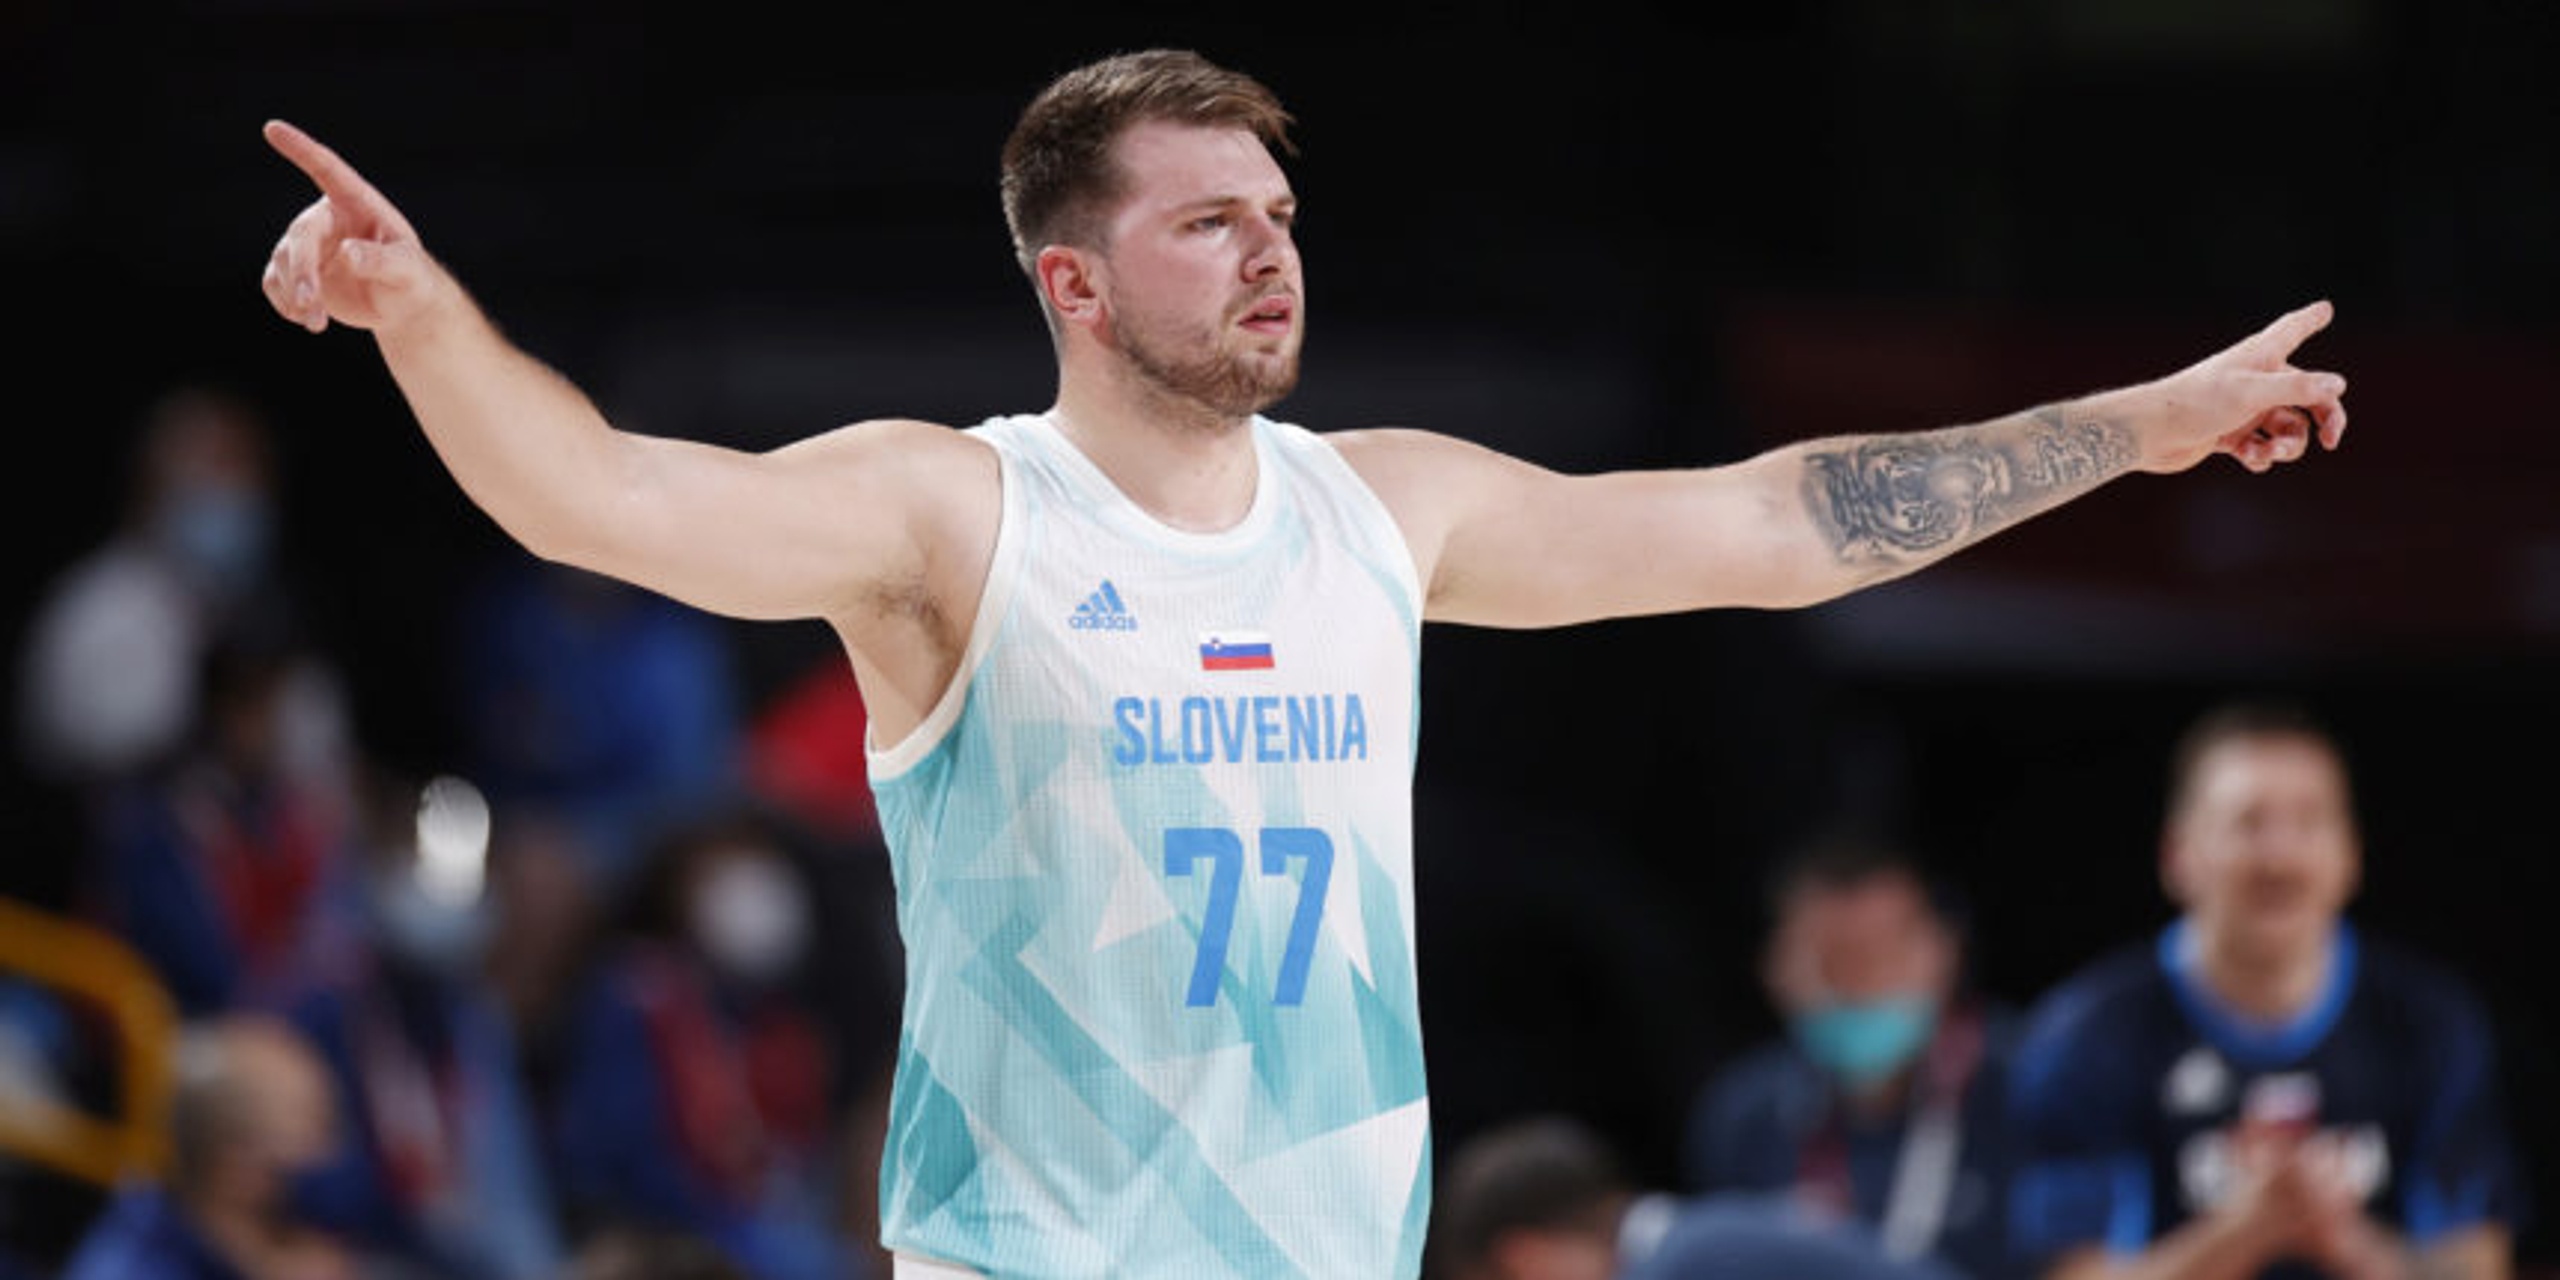 Luka Doncic's Olympic debut earns praise: 'He's the best in the world'